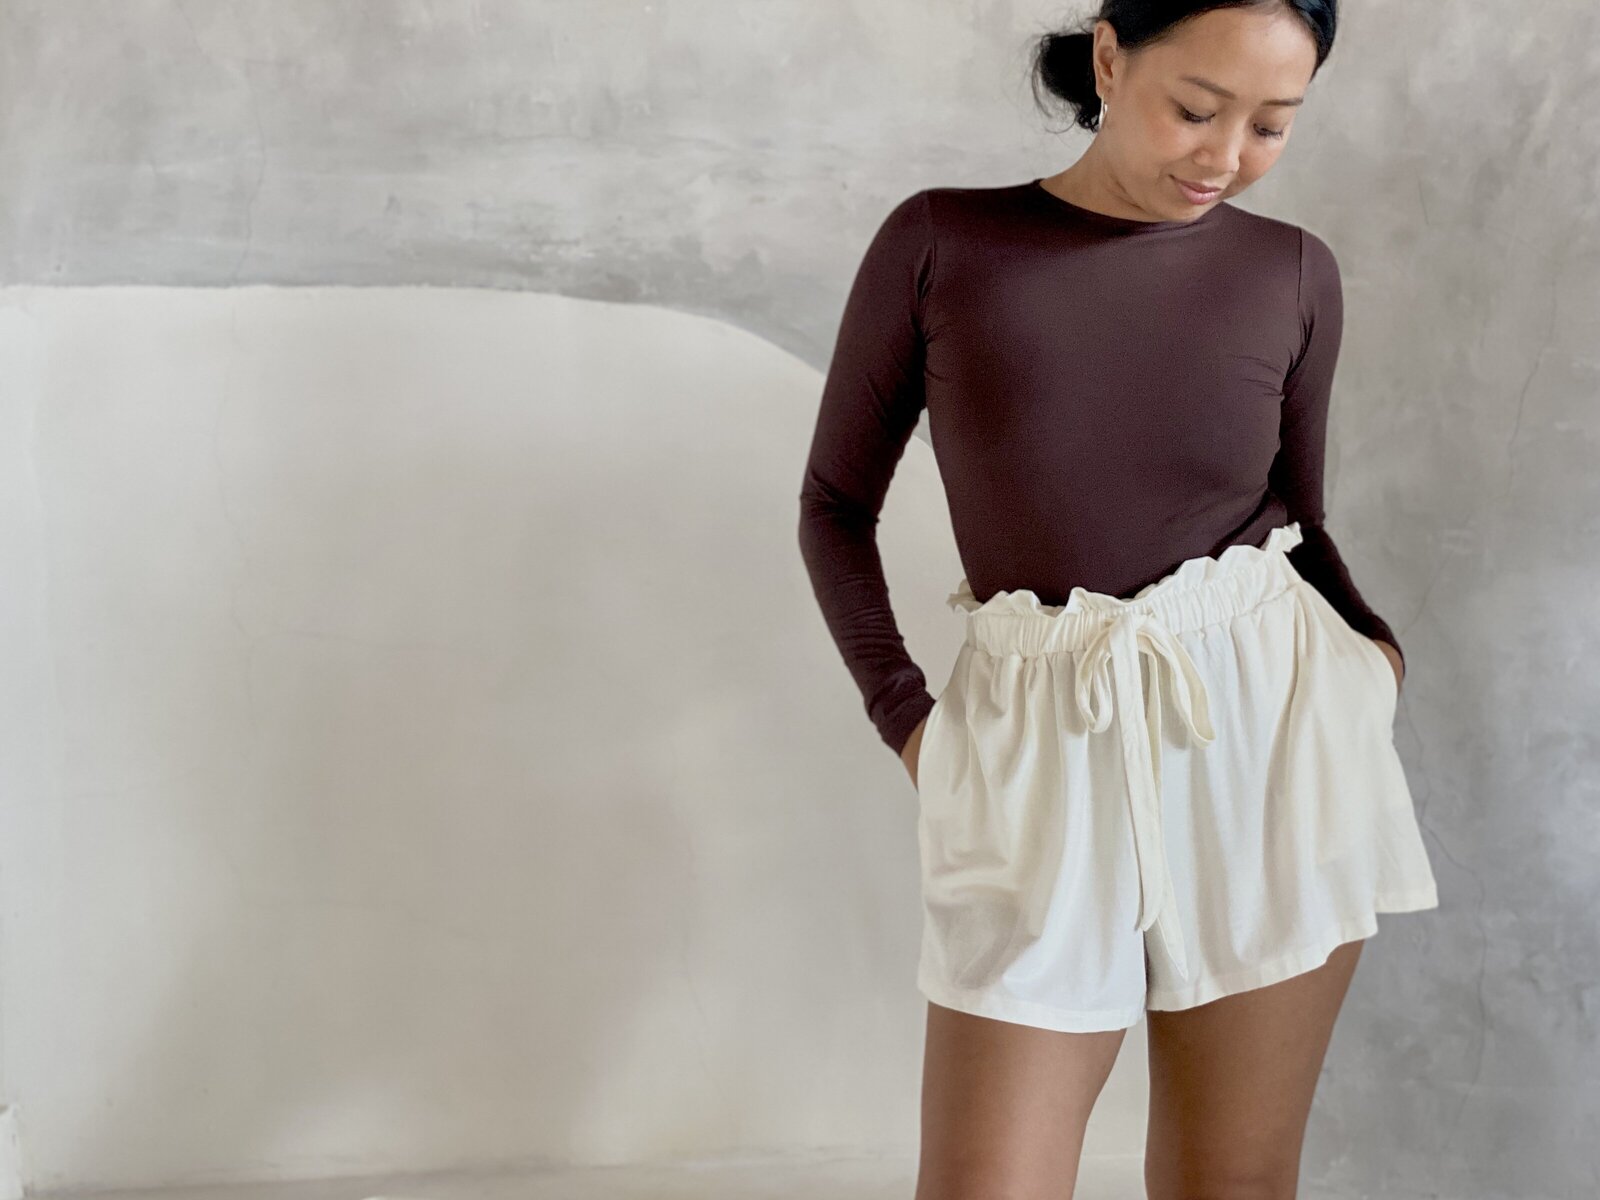 Bali Retreat Collection - the essential tie waist supersoft shorts, YinSide Yoga Bali - Island White _ Earth Brown Bodysuit